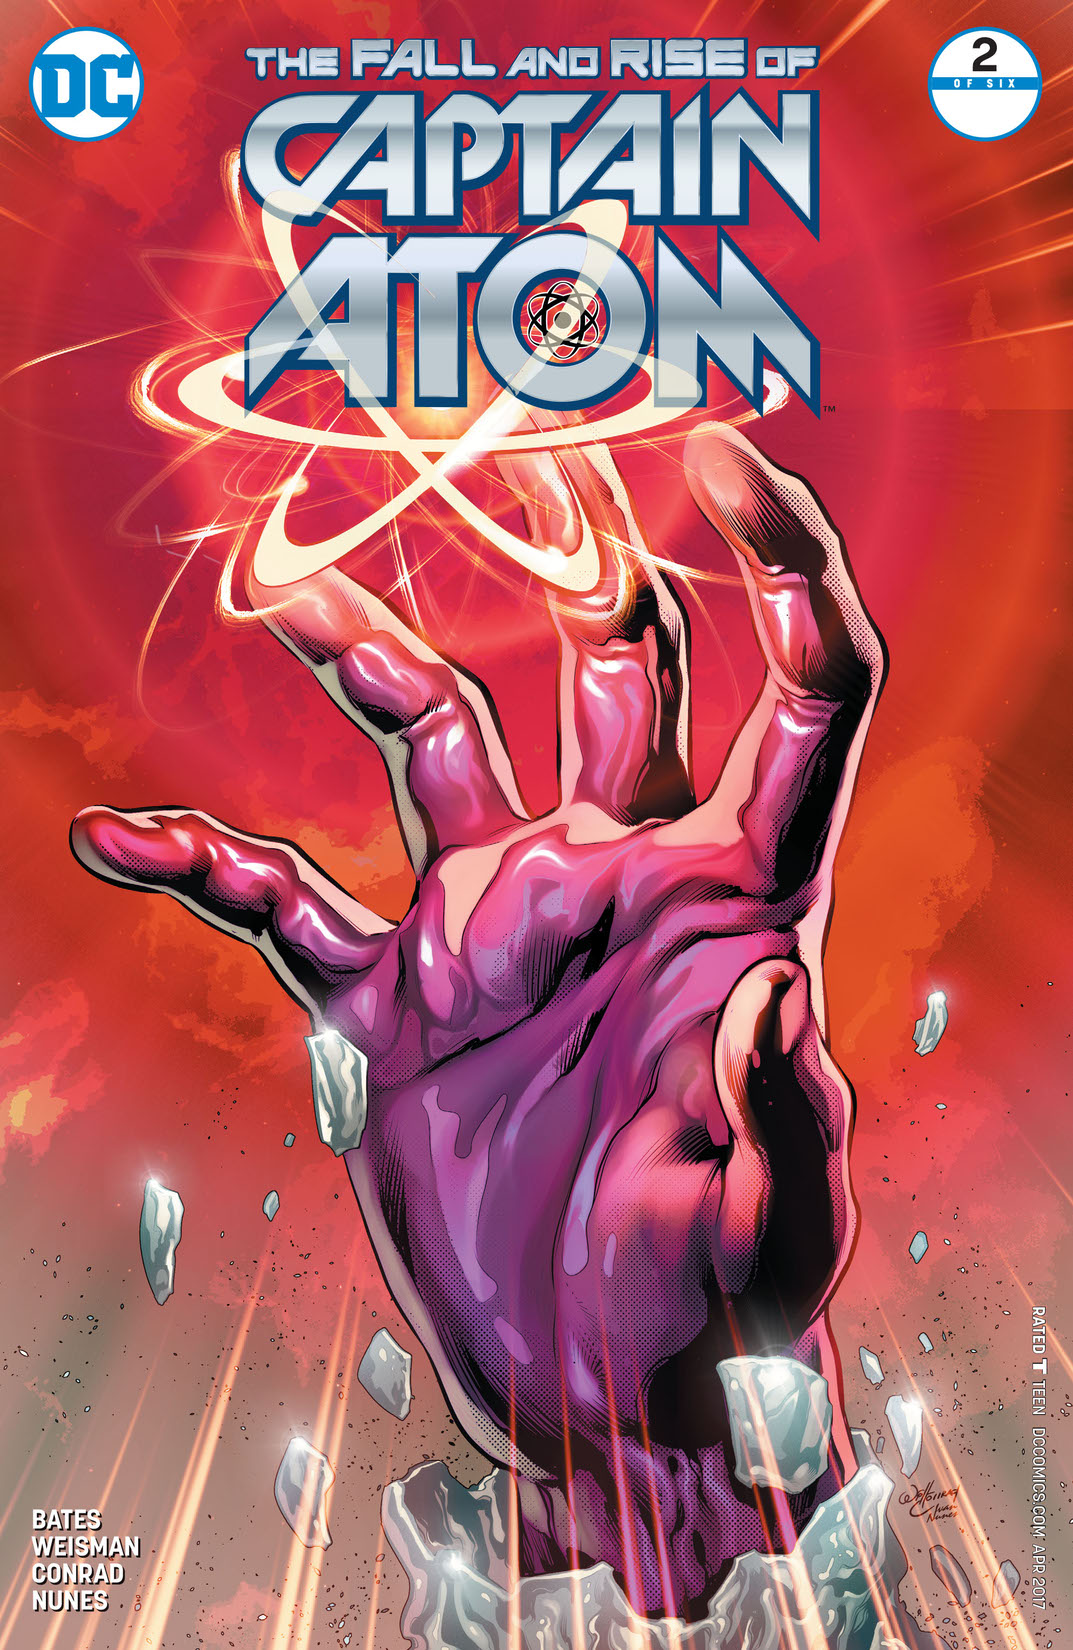 The Fall and Rise of Captain Atom #2 preview images